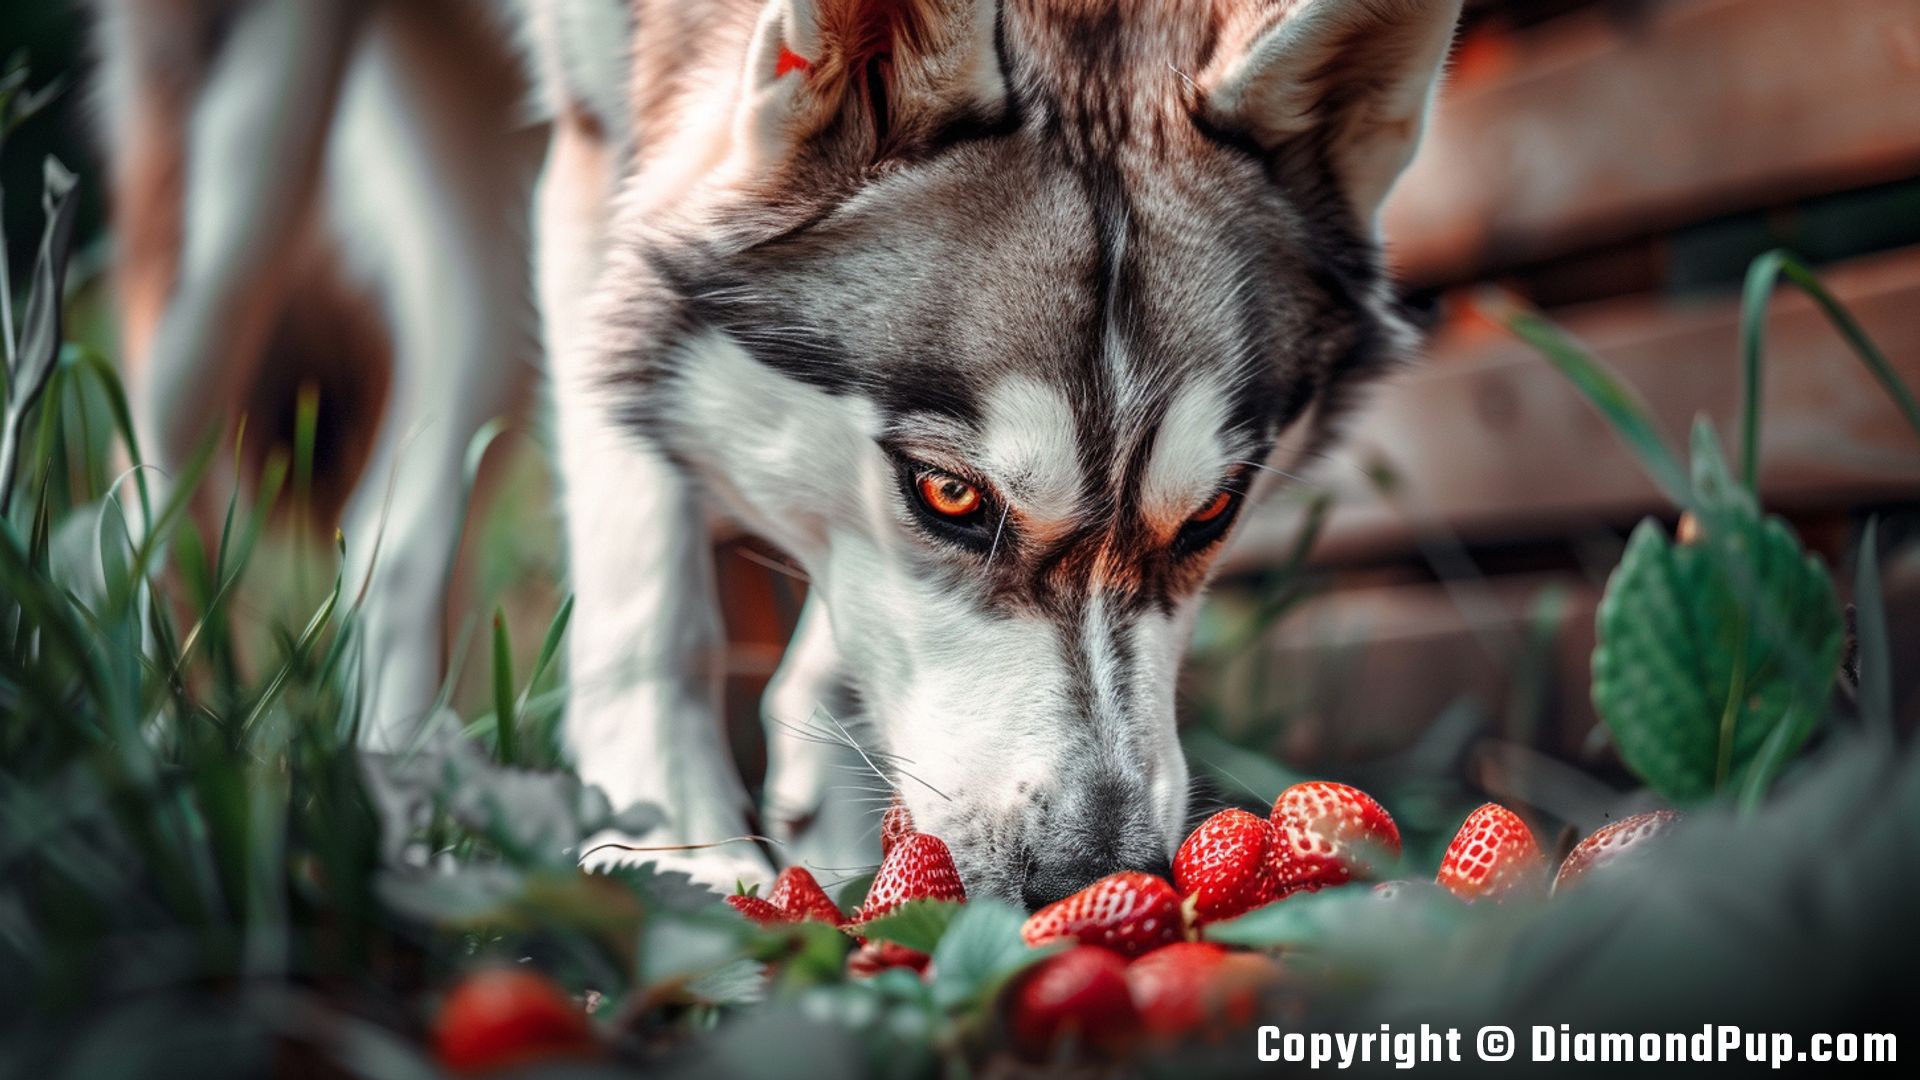 Photo of a Cute Husky Eating Strawberries